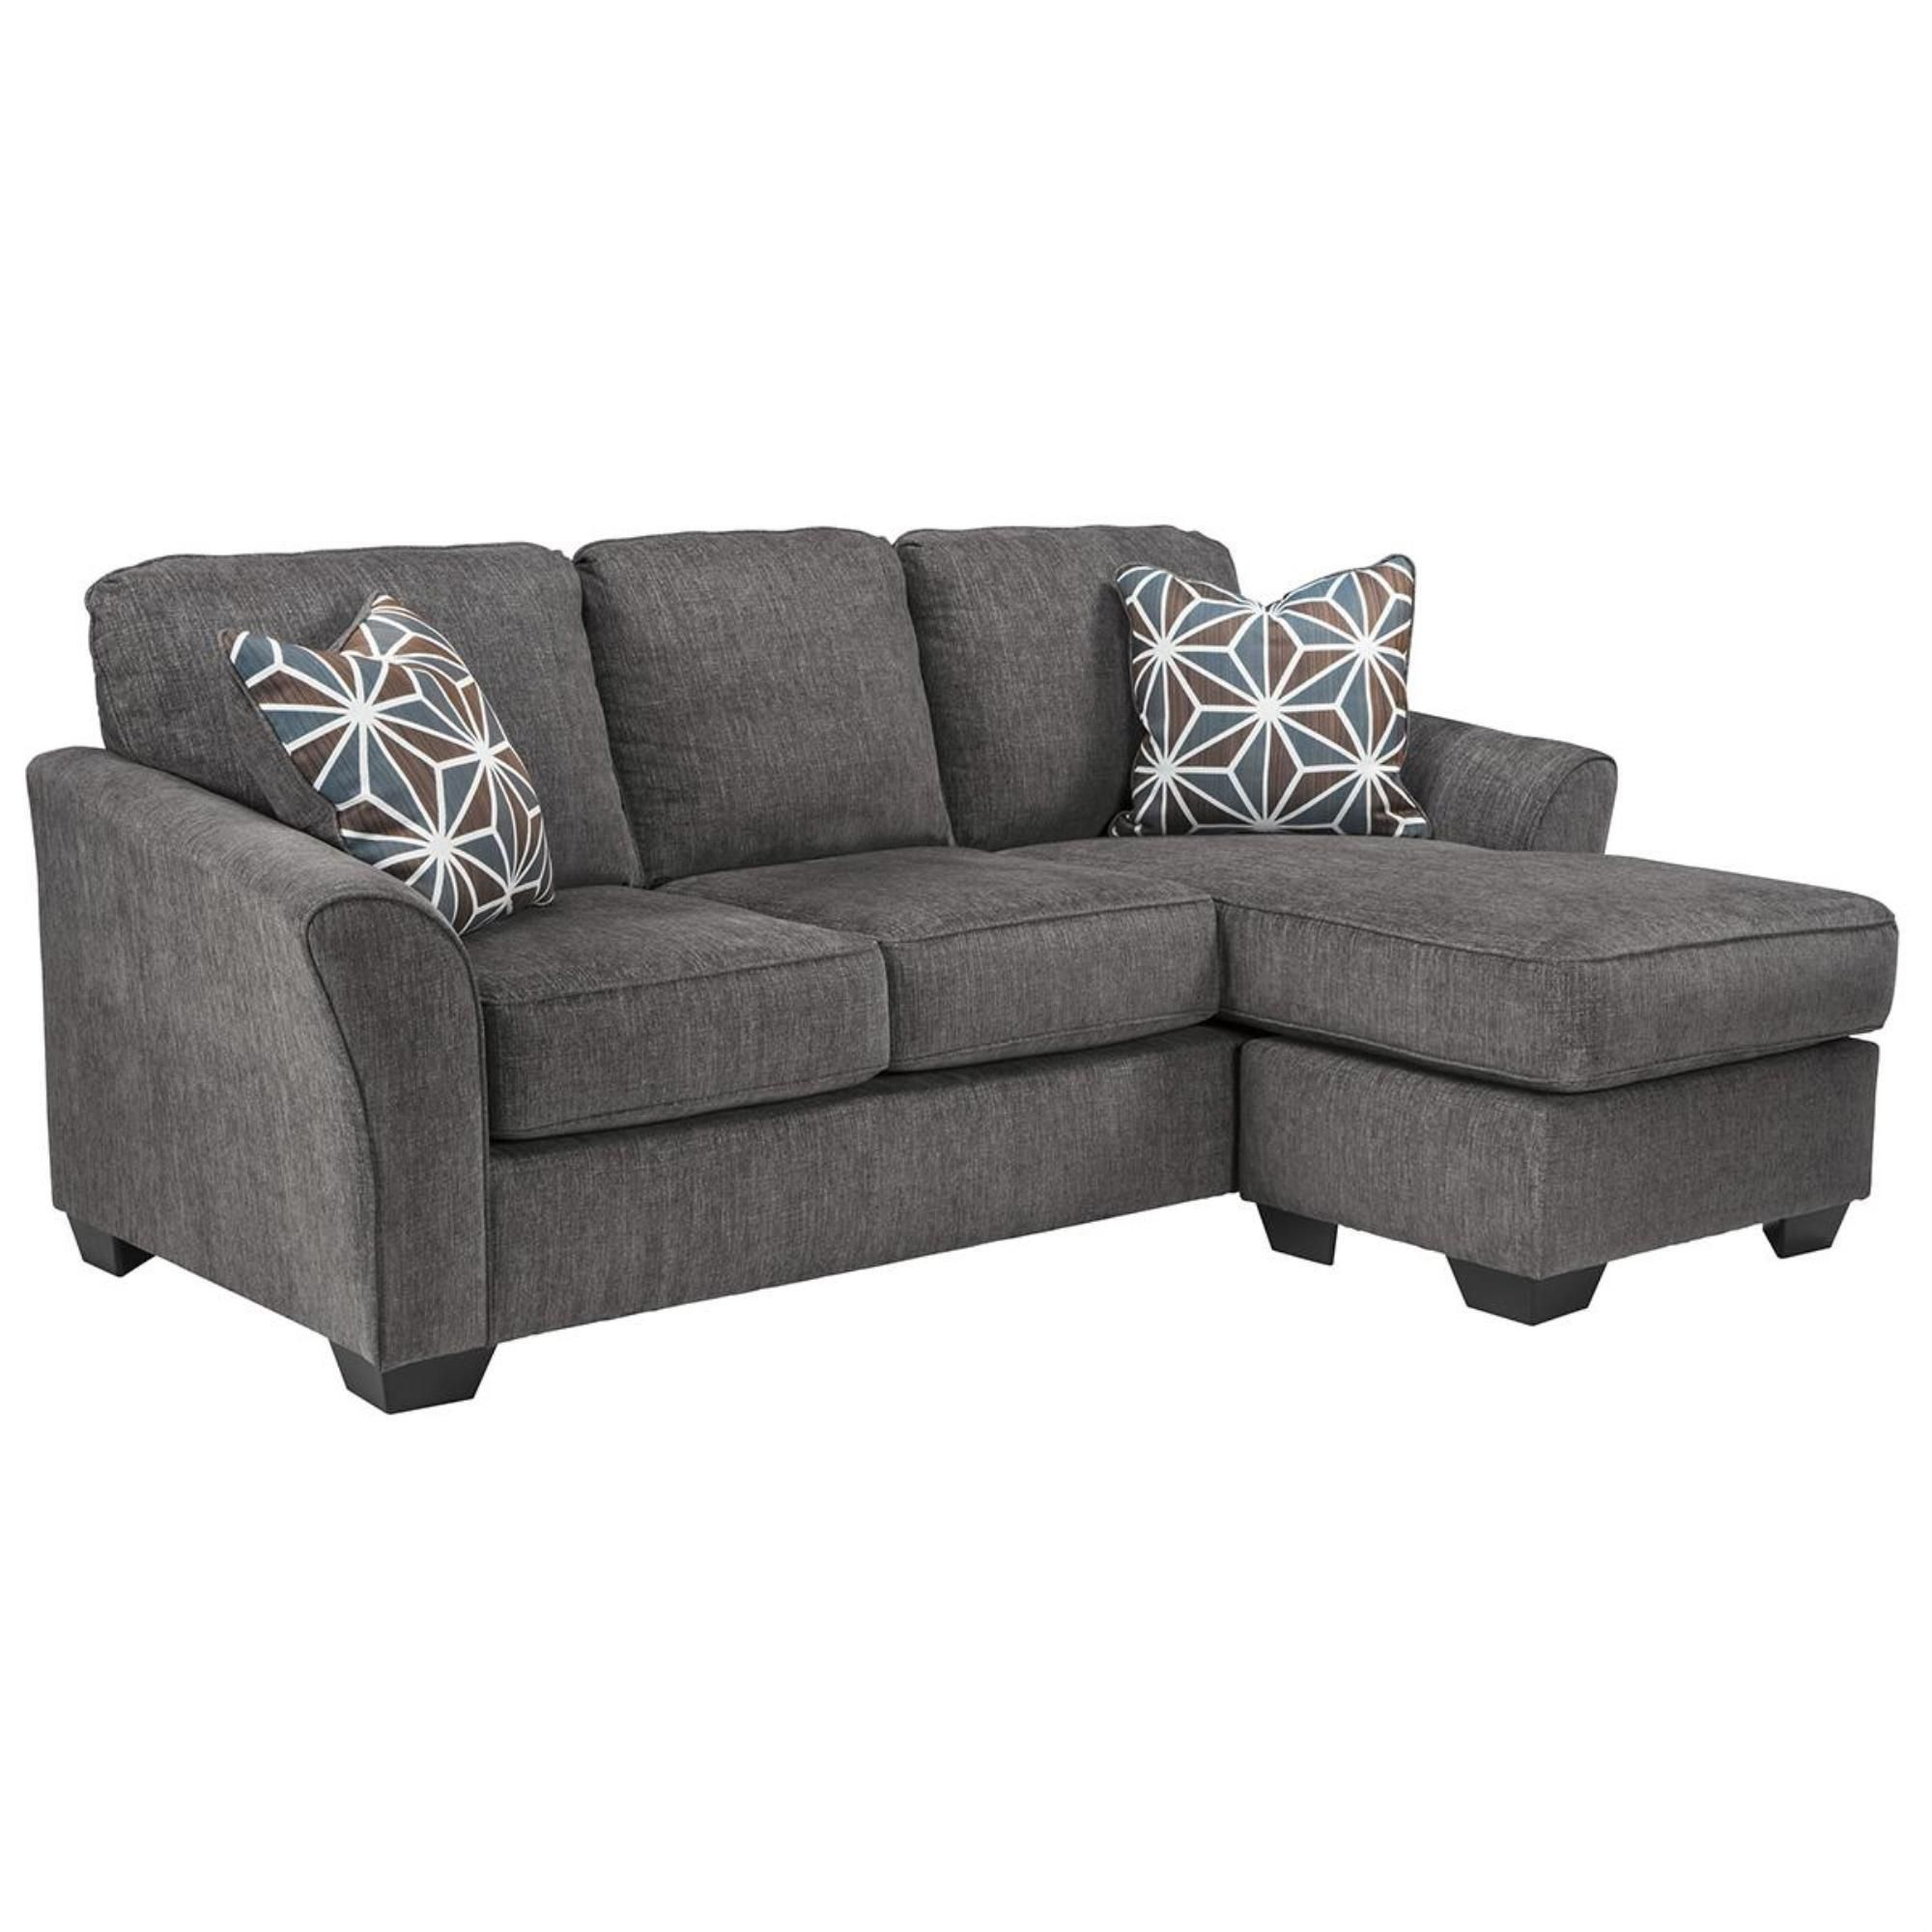 Signature Designashley Brise Queen Sleeper Sofa With Chaise In Gray |  Nfm Throughout Convertible Sofa With Matching Chaise (Gallery 17 of 20)